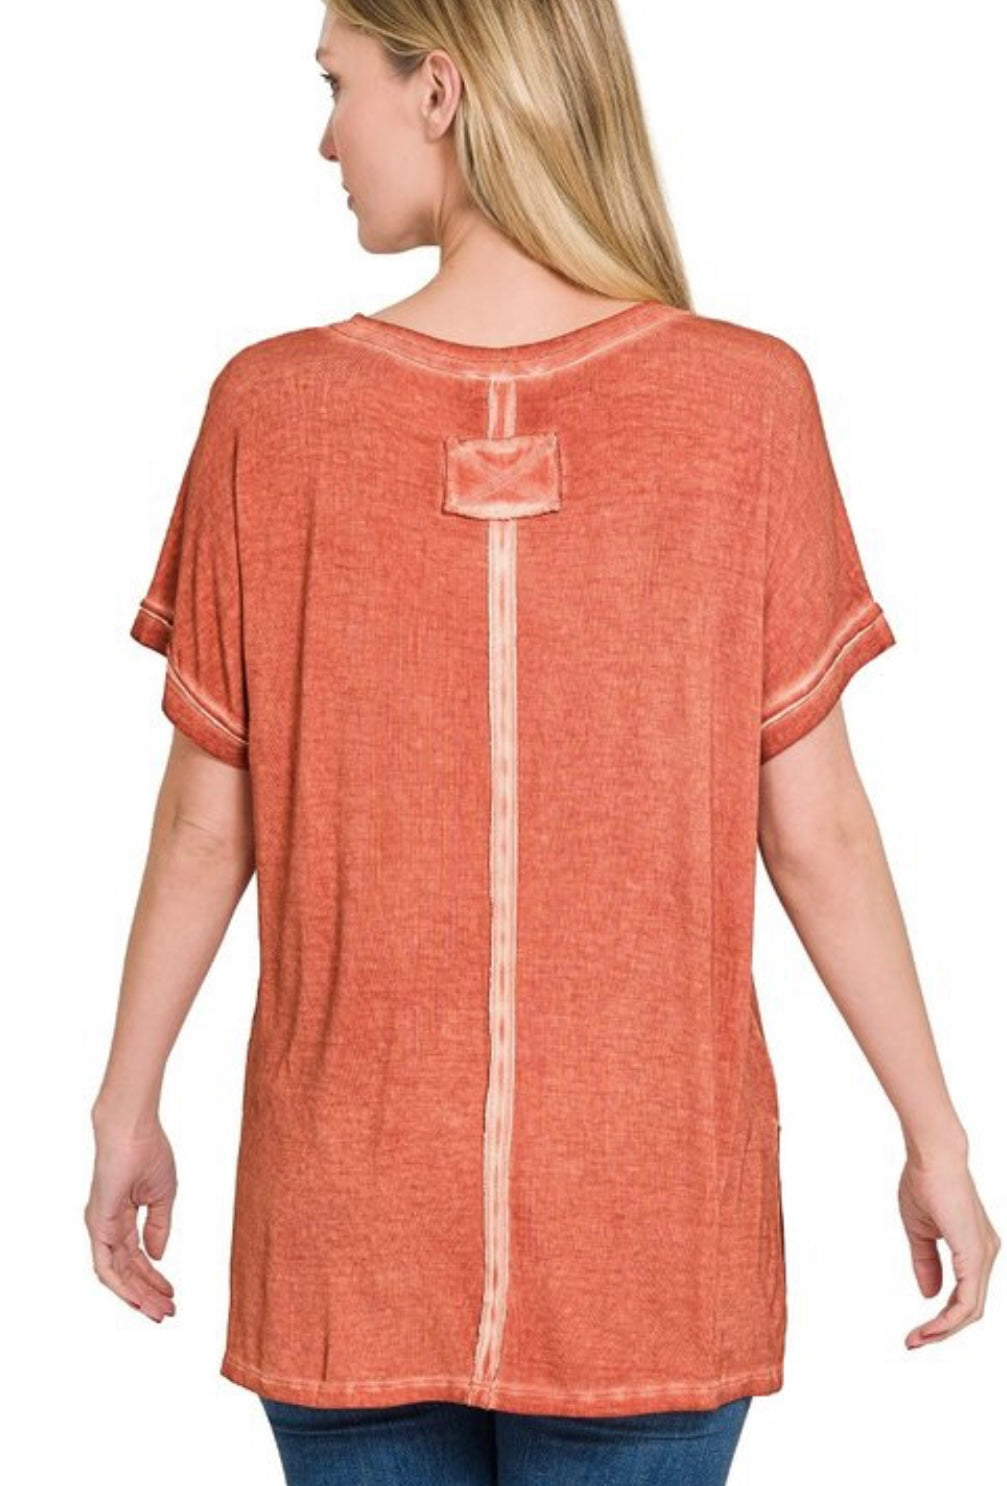 Nikki Mineral Washed Top